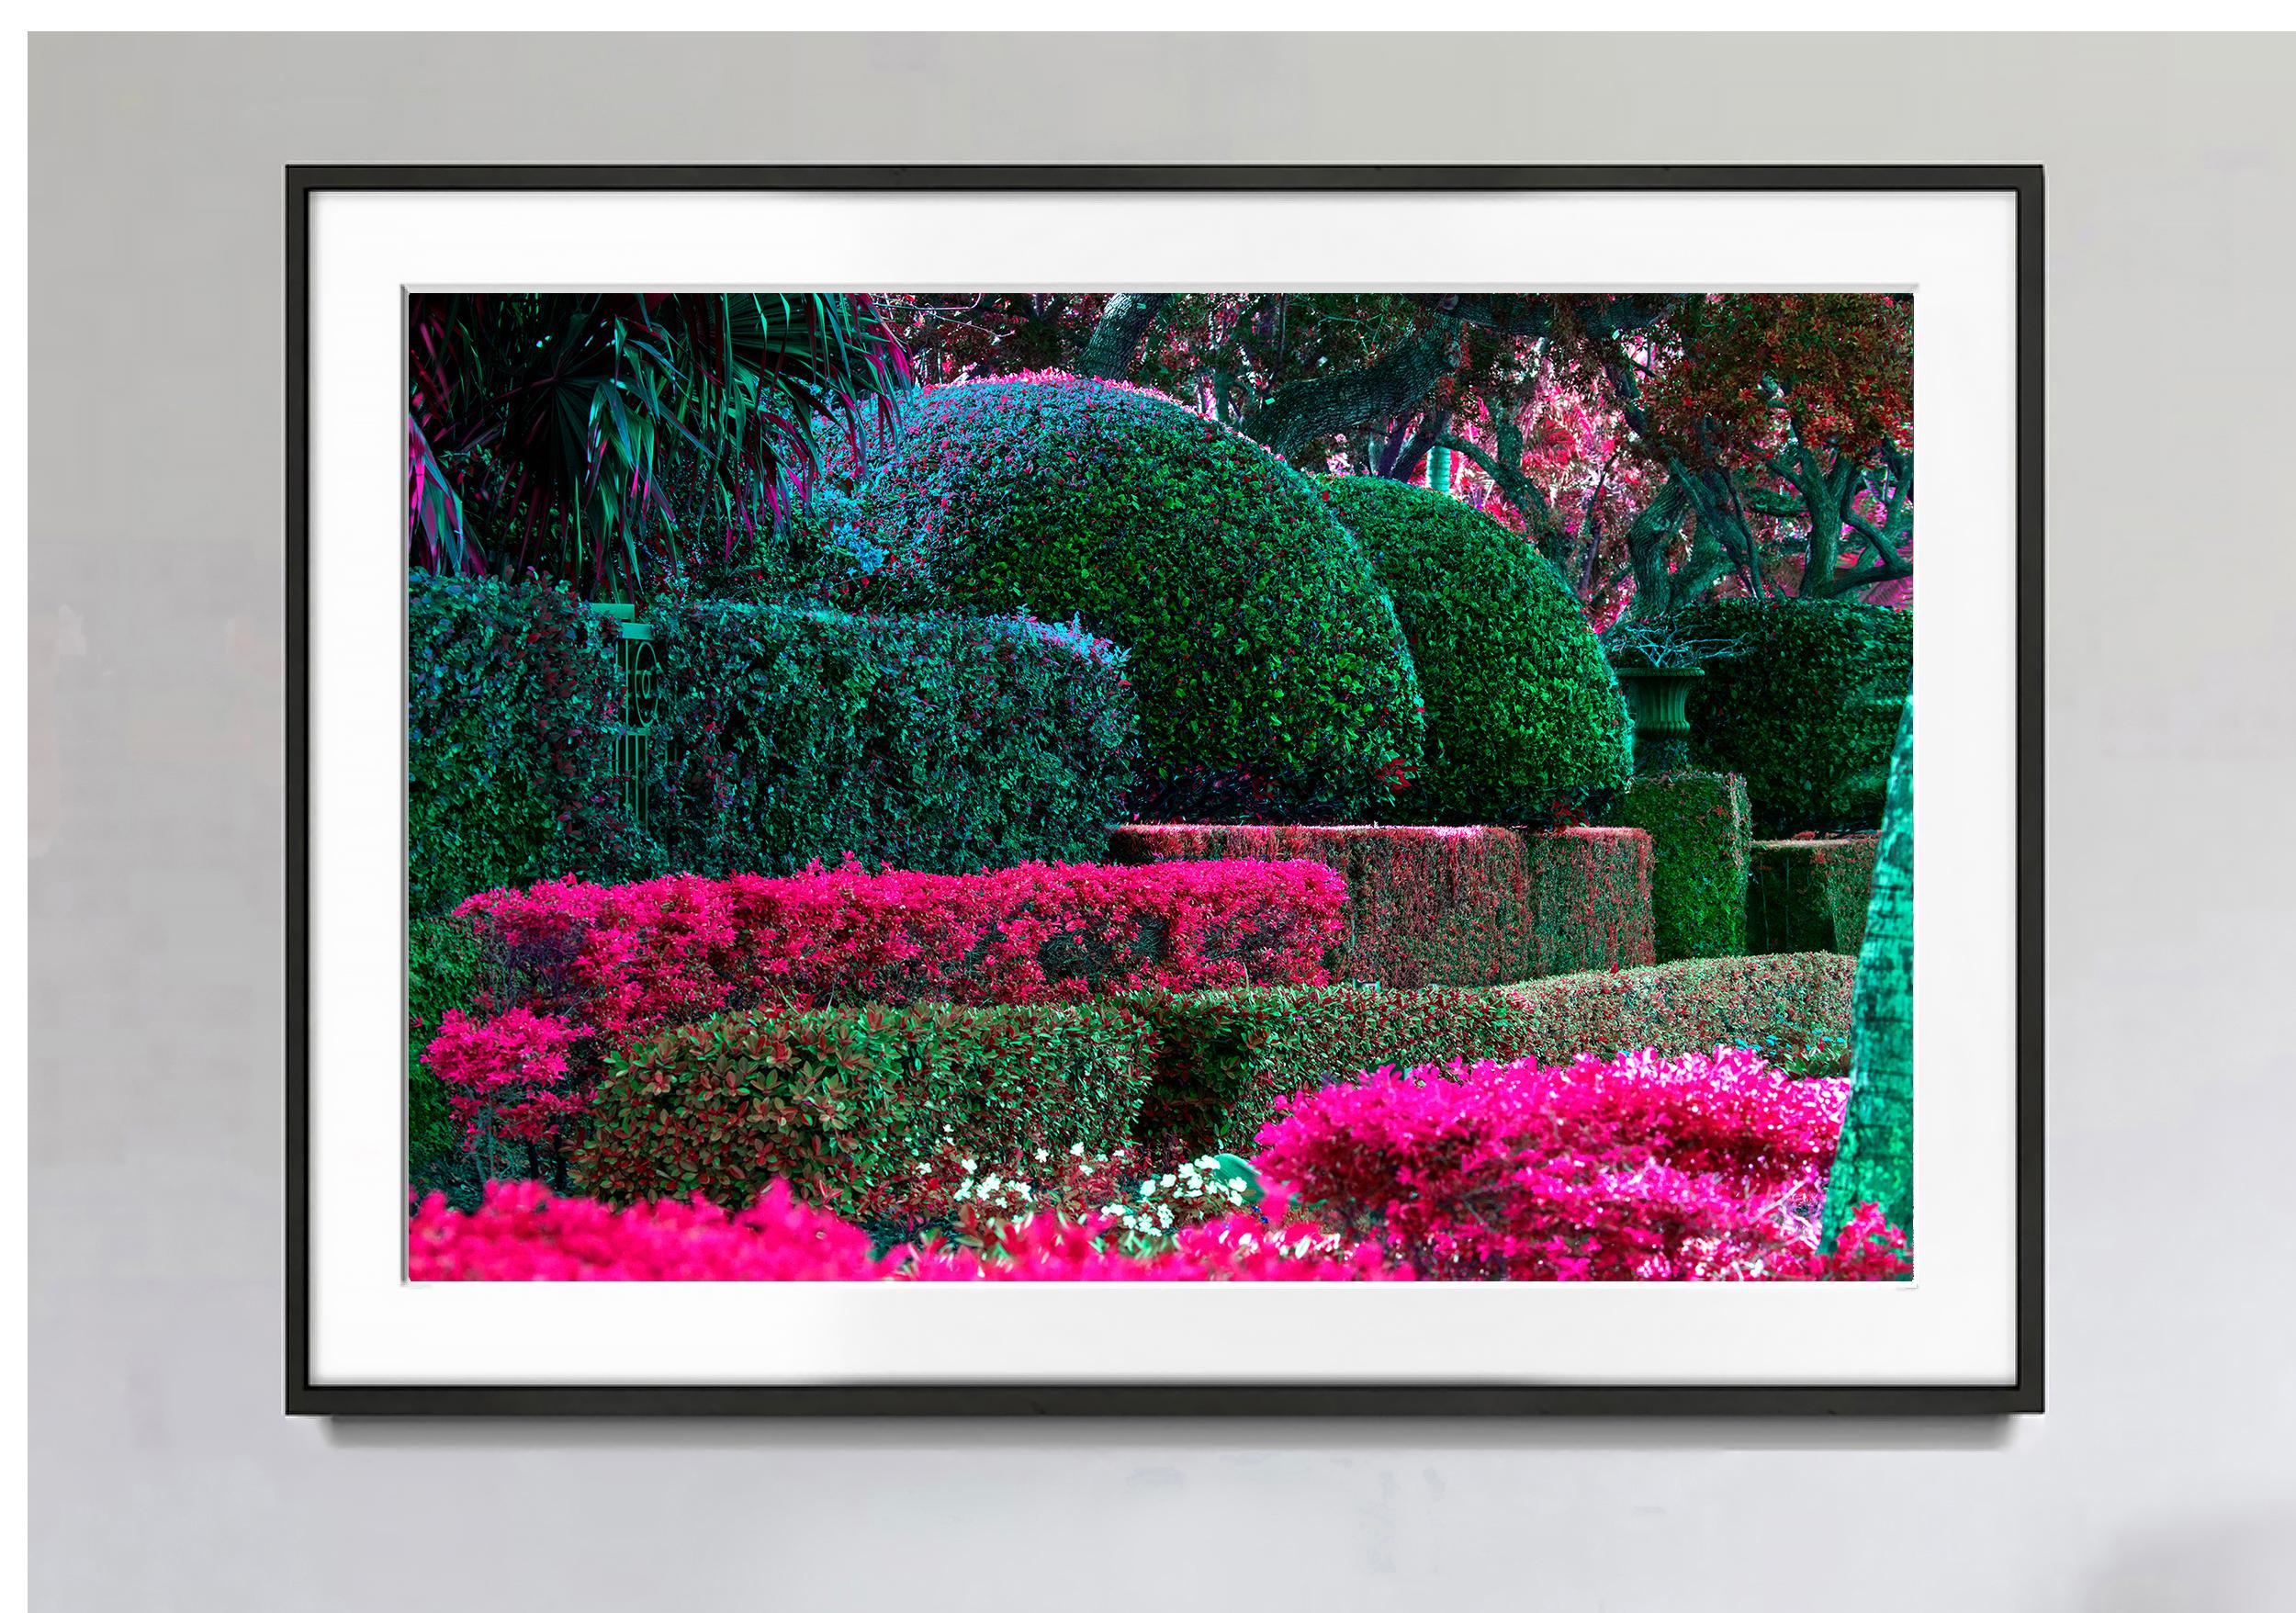 Hedge Fun - The Biltmore Hotel Coral Gables - Photograph by Robert Funk